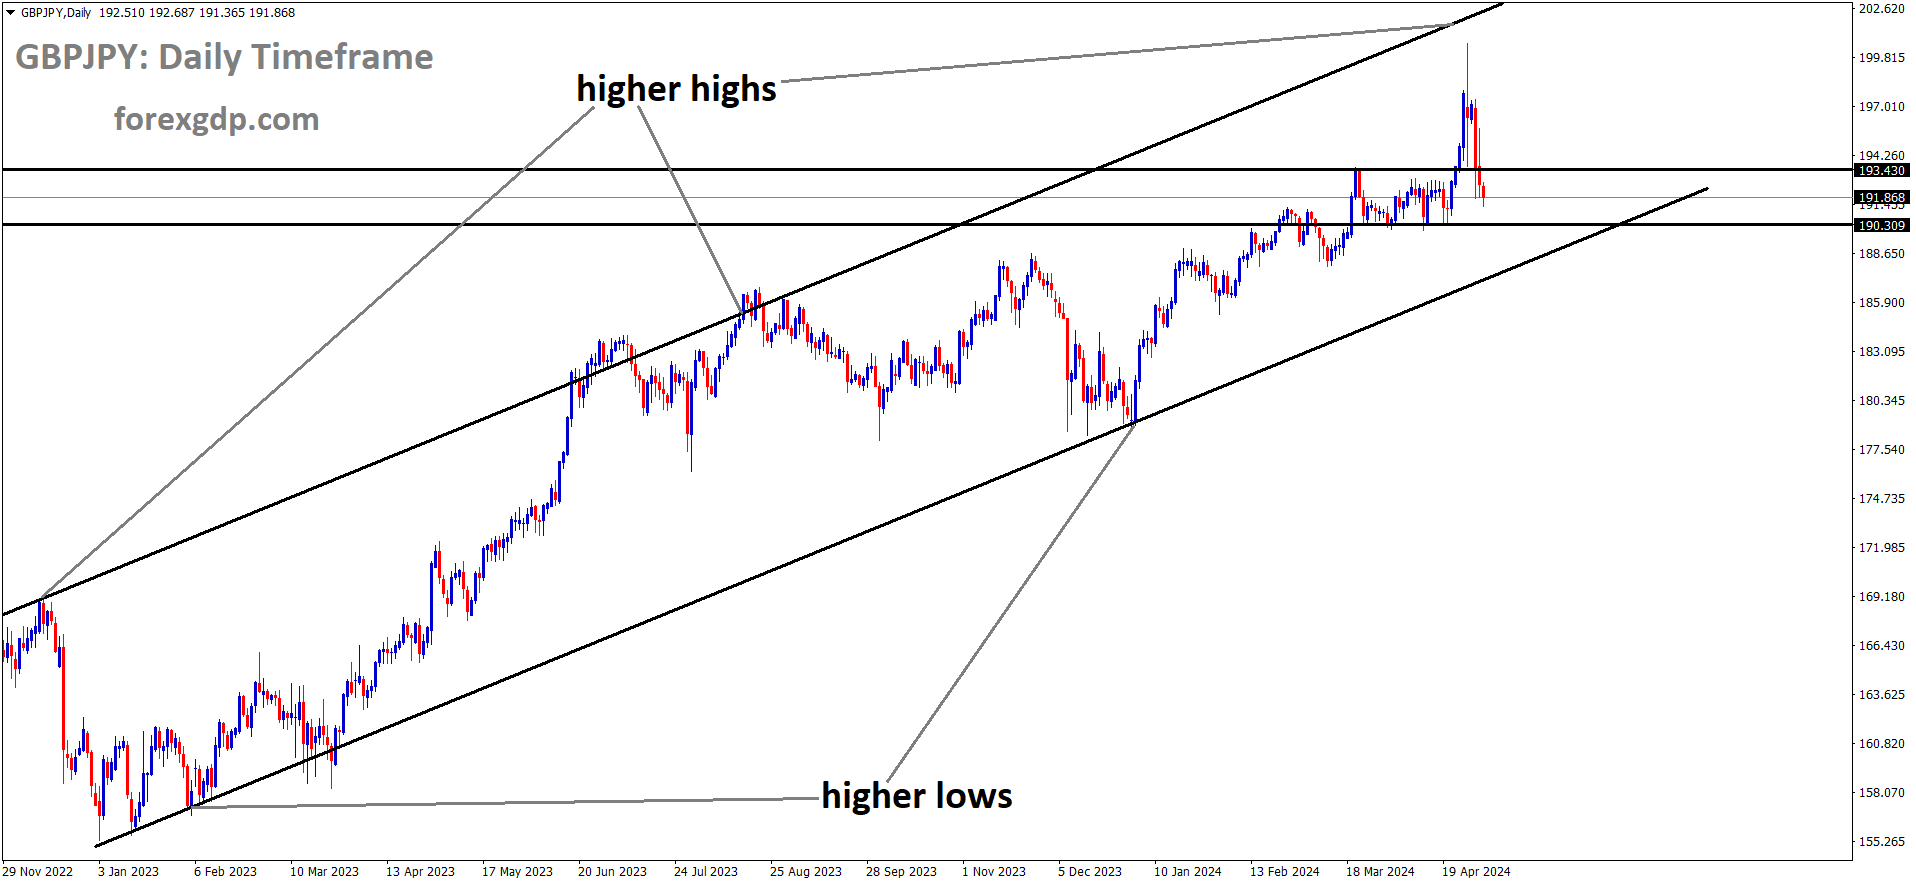 GBPJPY is moving in Ascending channel and market has fallen from the higher high area of the channel